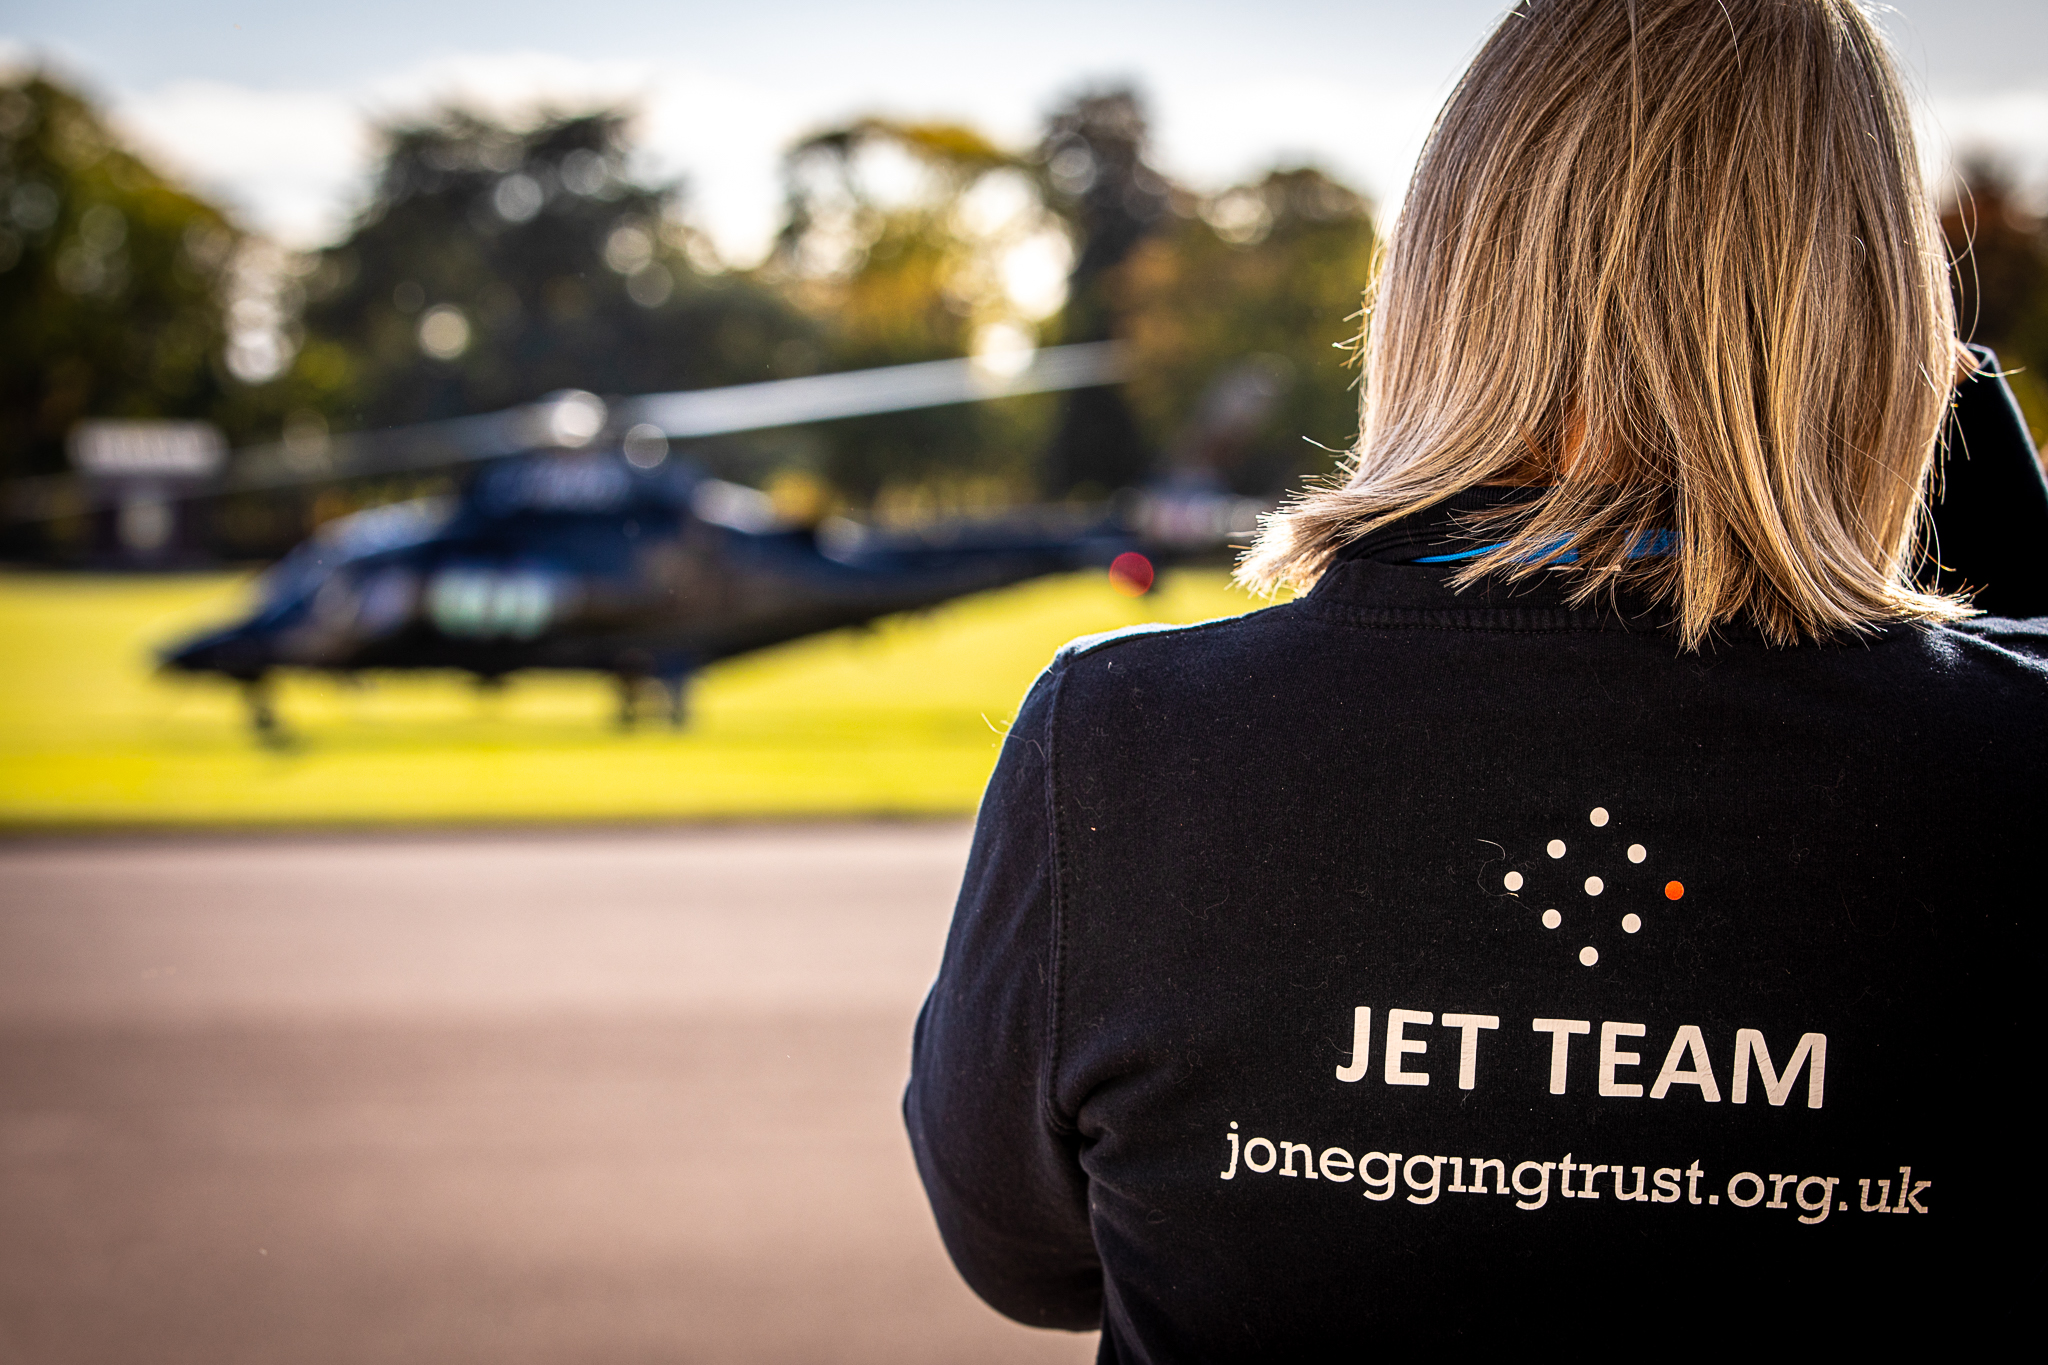 Image shows member of the JET team looking towards a helicopter.